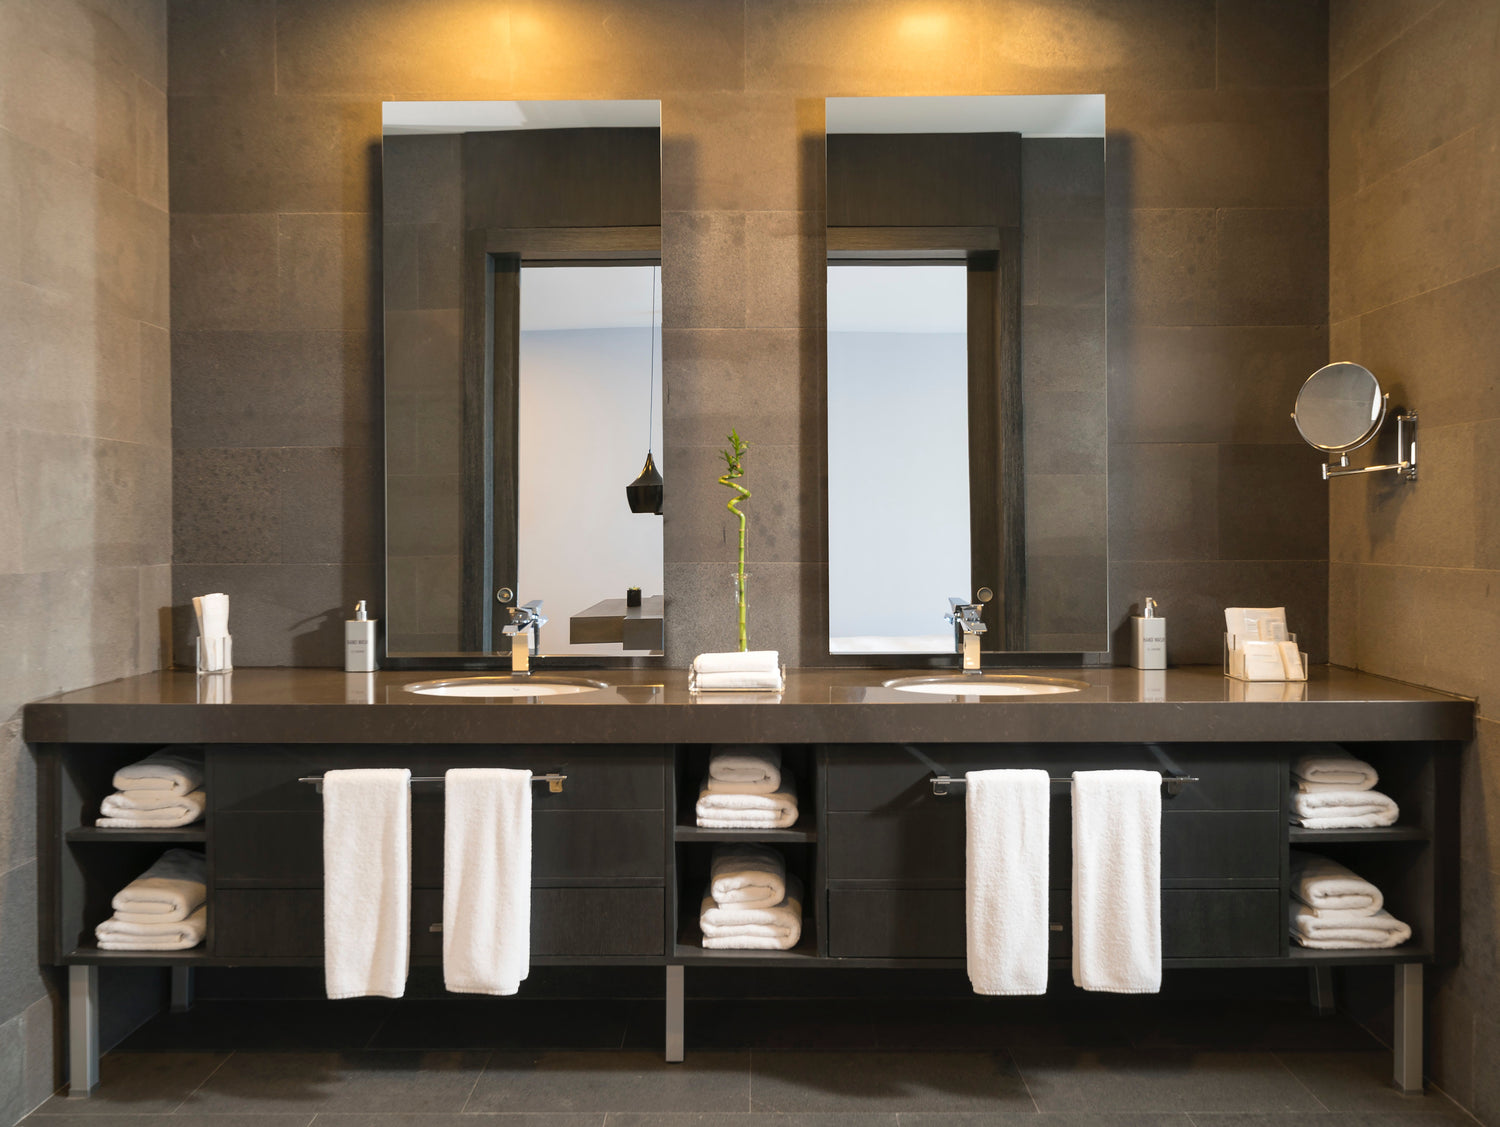 Interior designer curated bathroom with double vanity and natural finishes. Modern feel